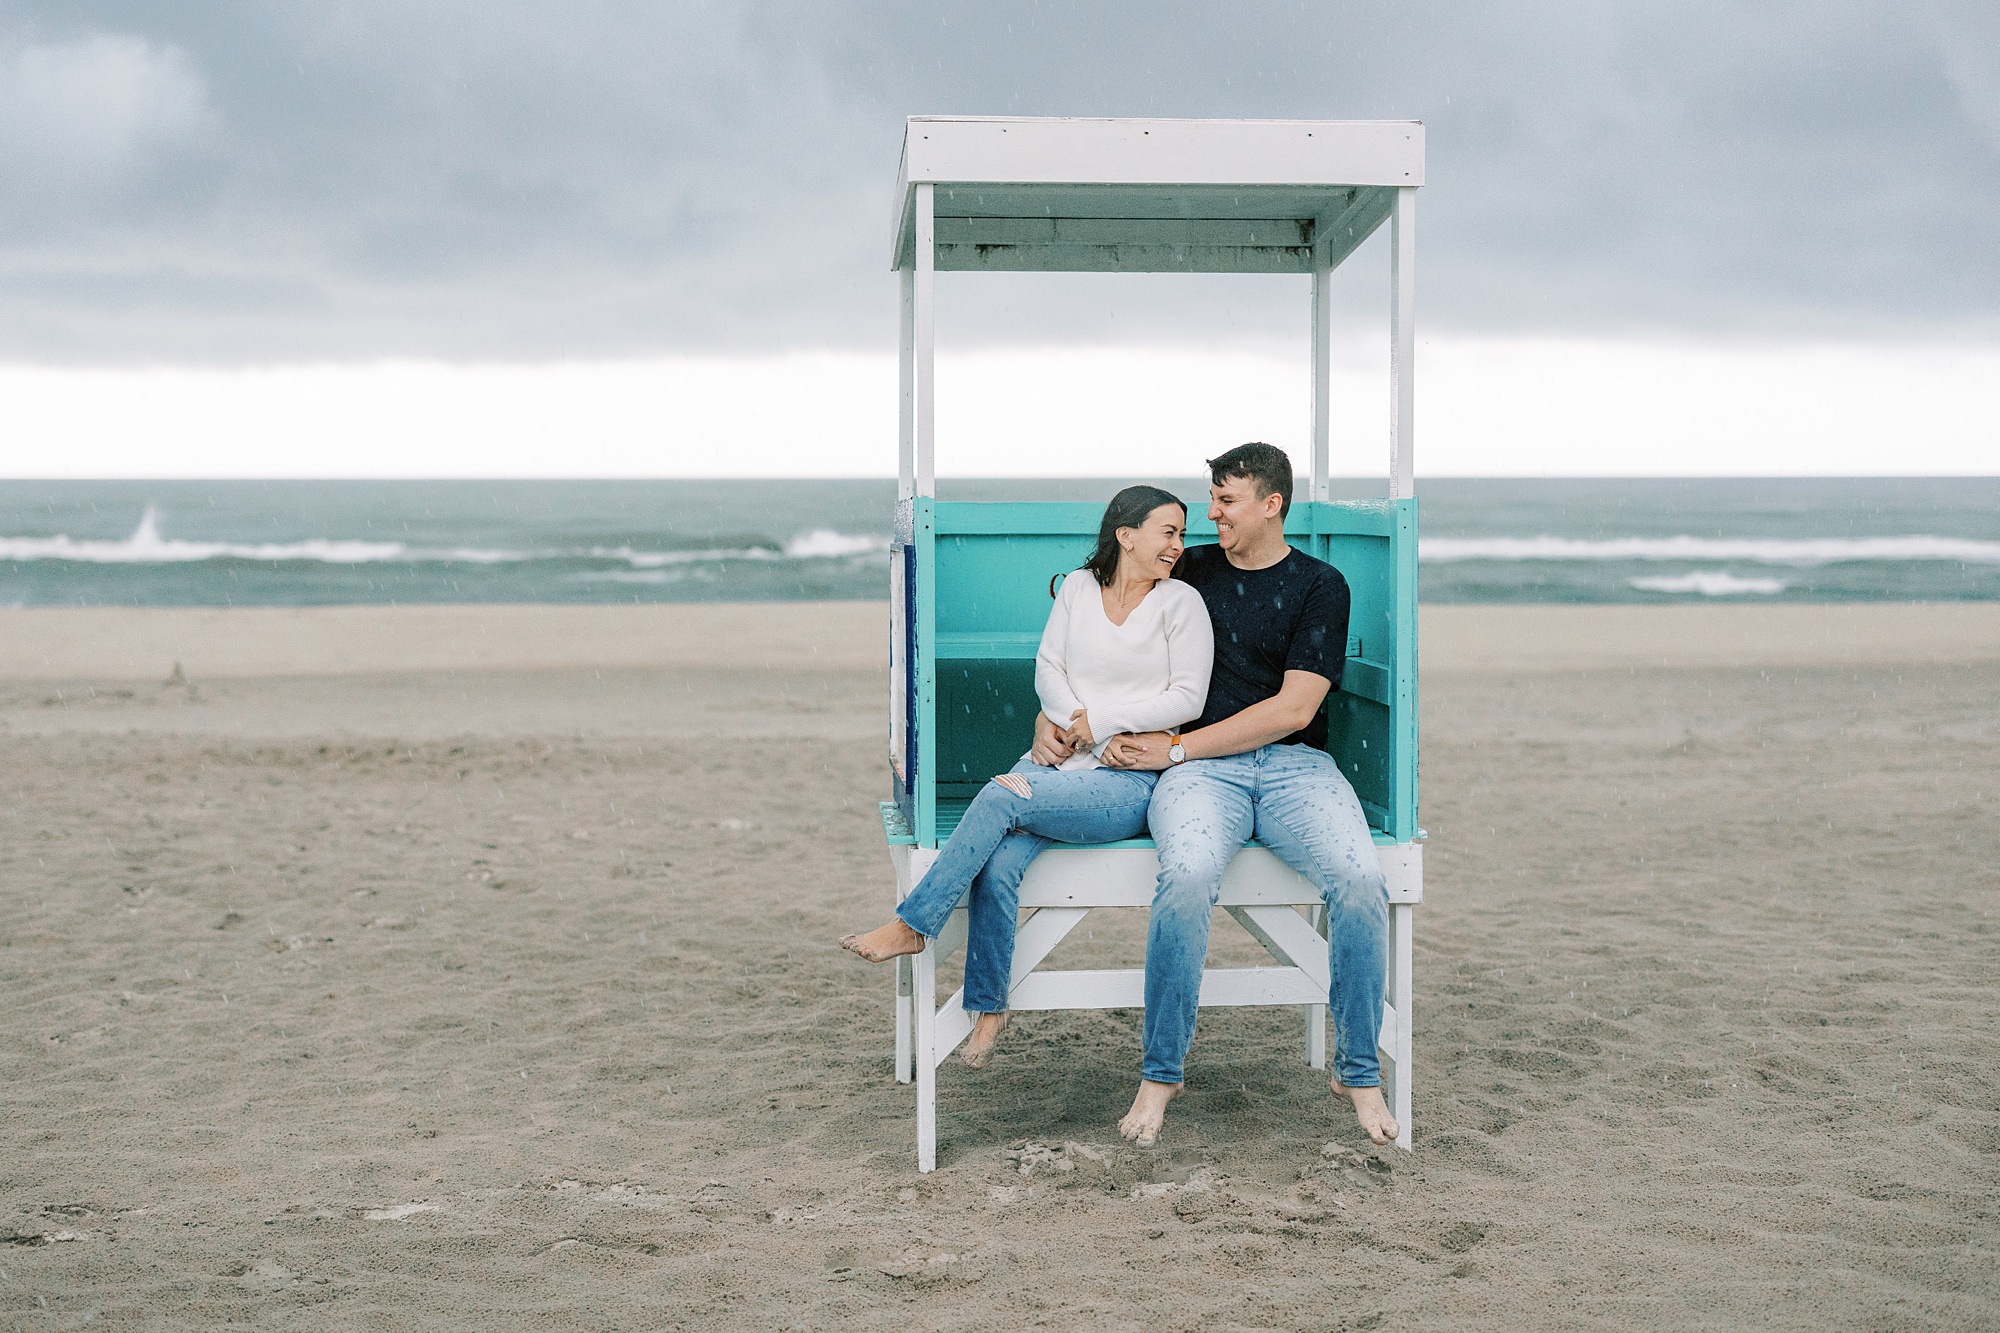 engaged couple sits in lifeguard stand during rainy day